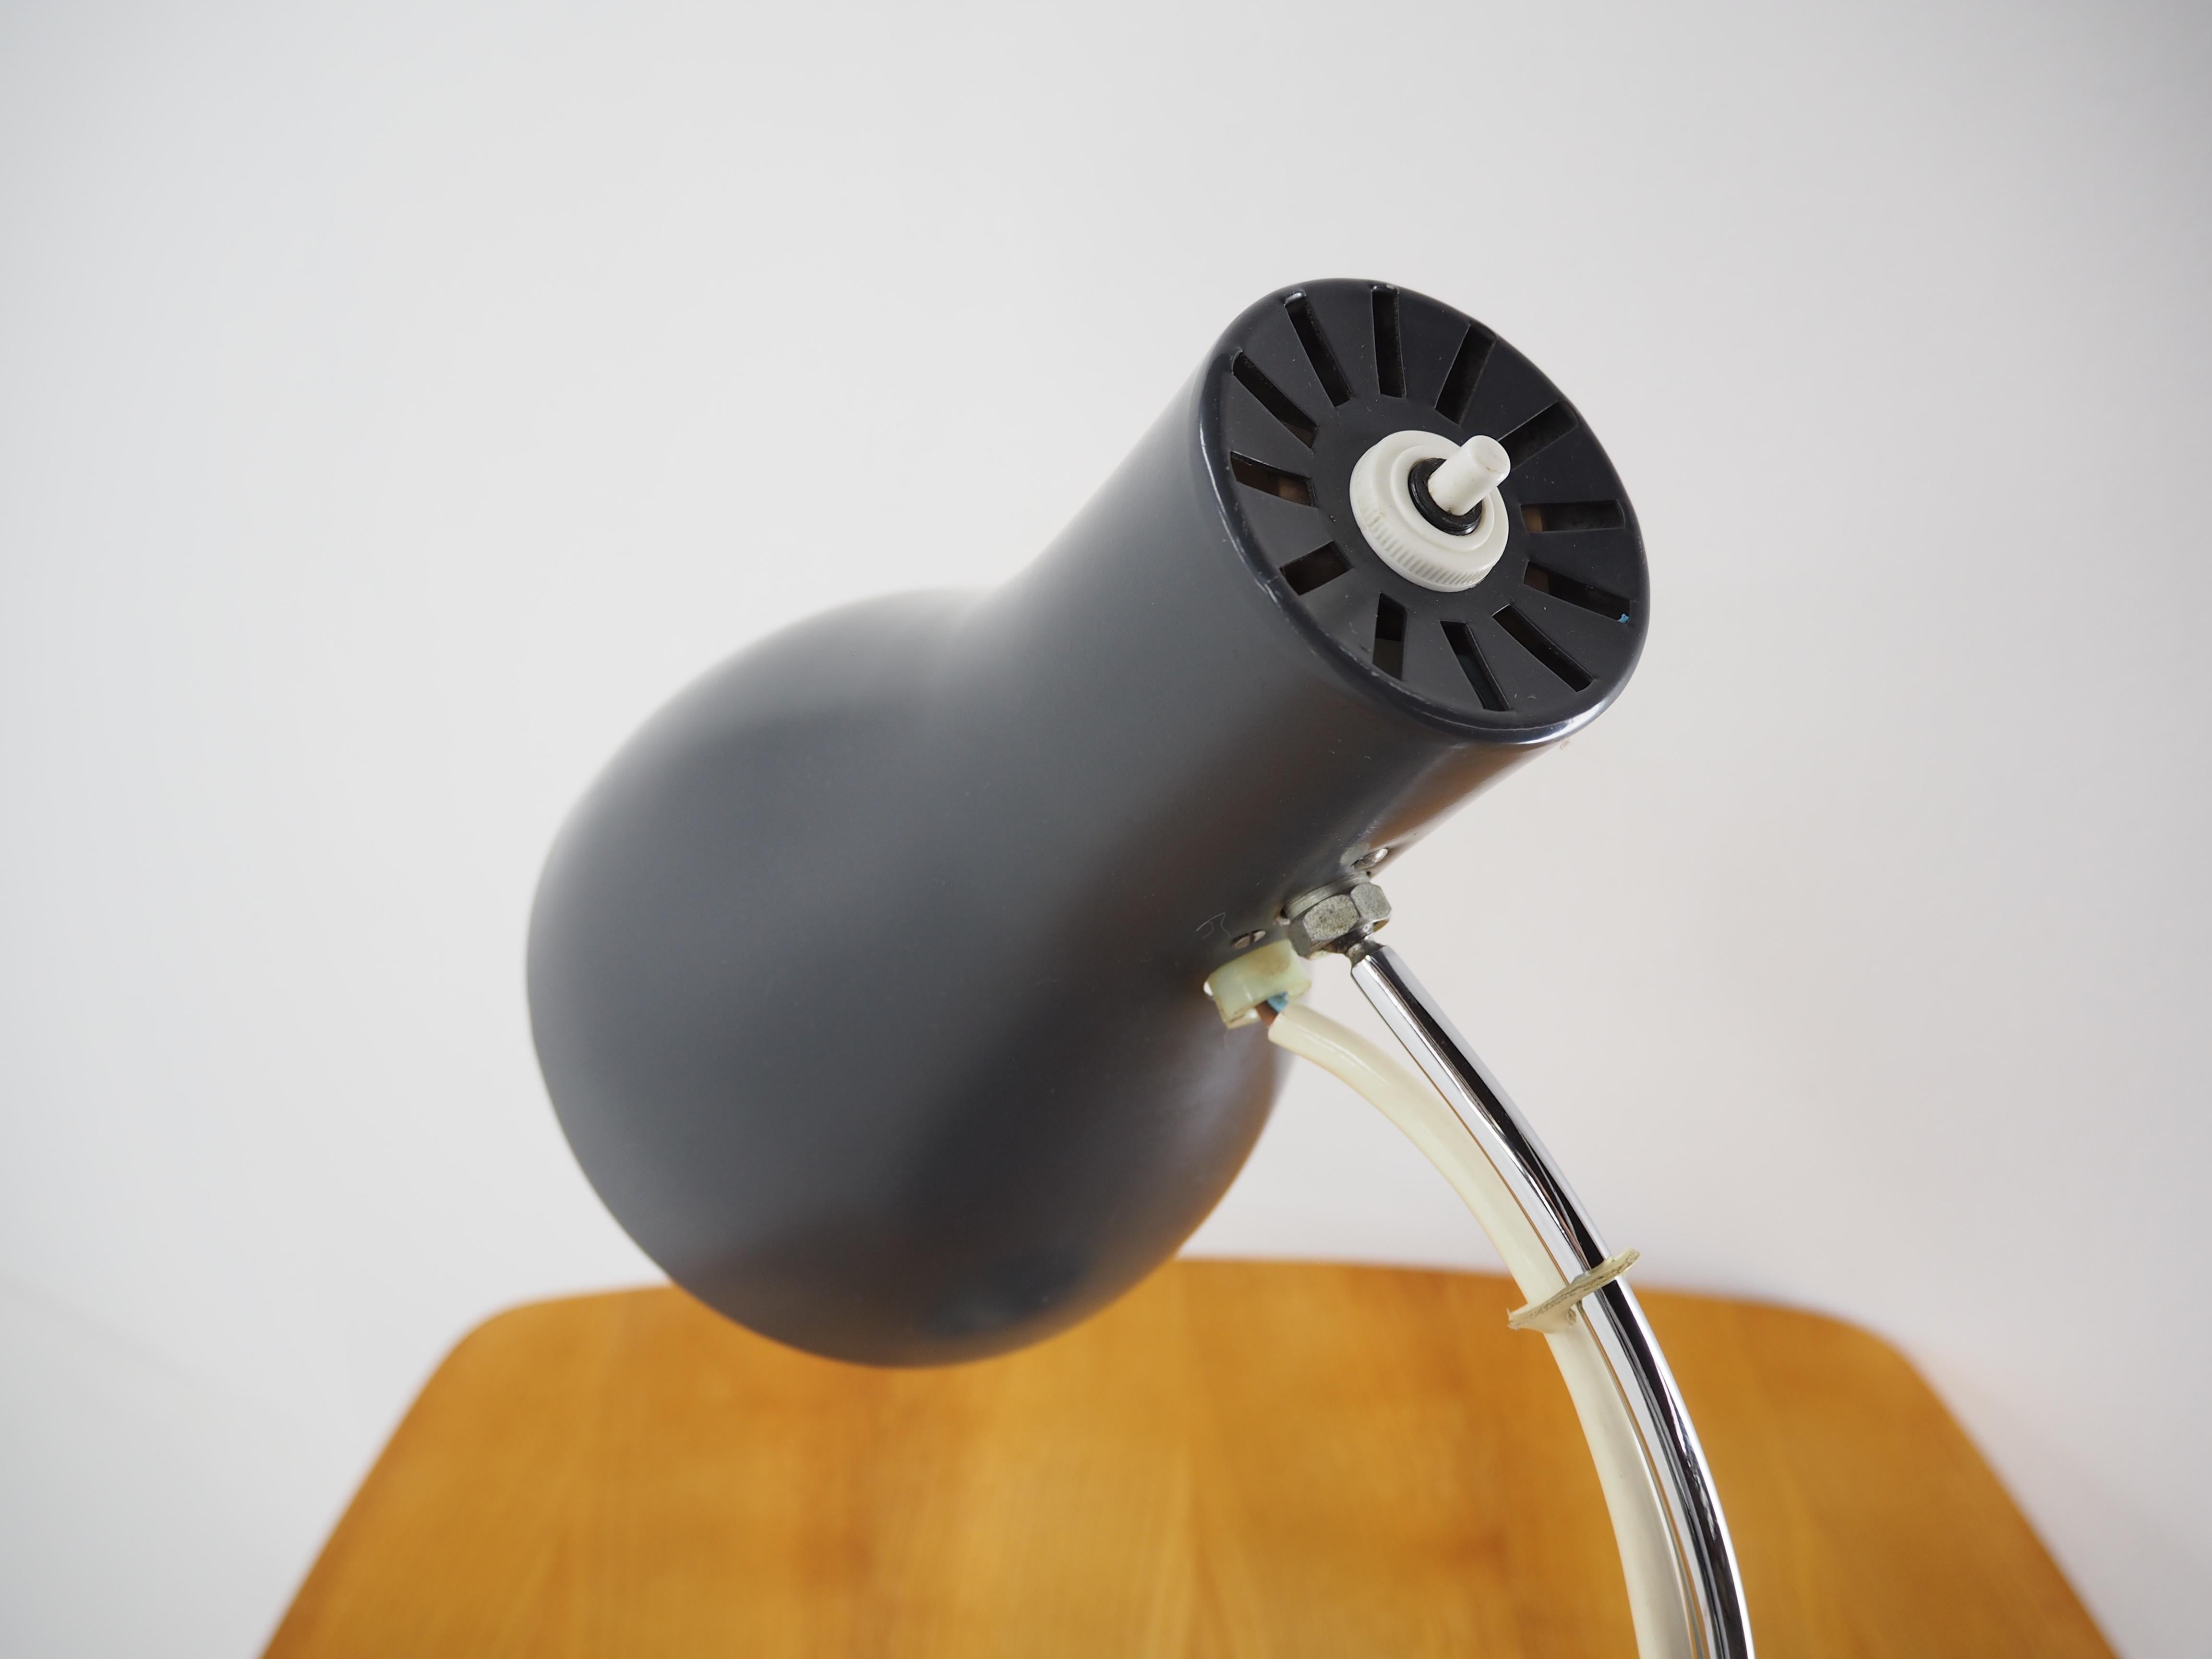 Metal Midcentury Table Lamp Designed by J. Hurka for Napako 1970s Type 0521